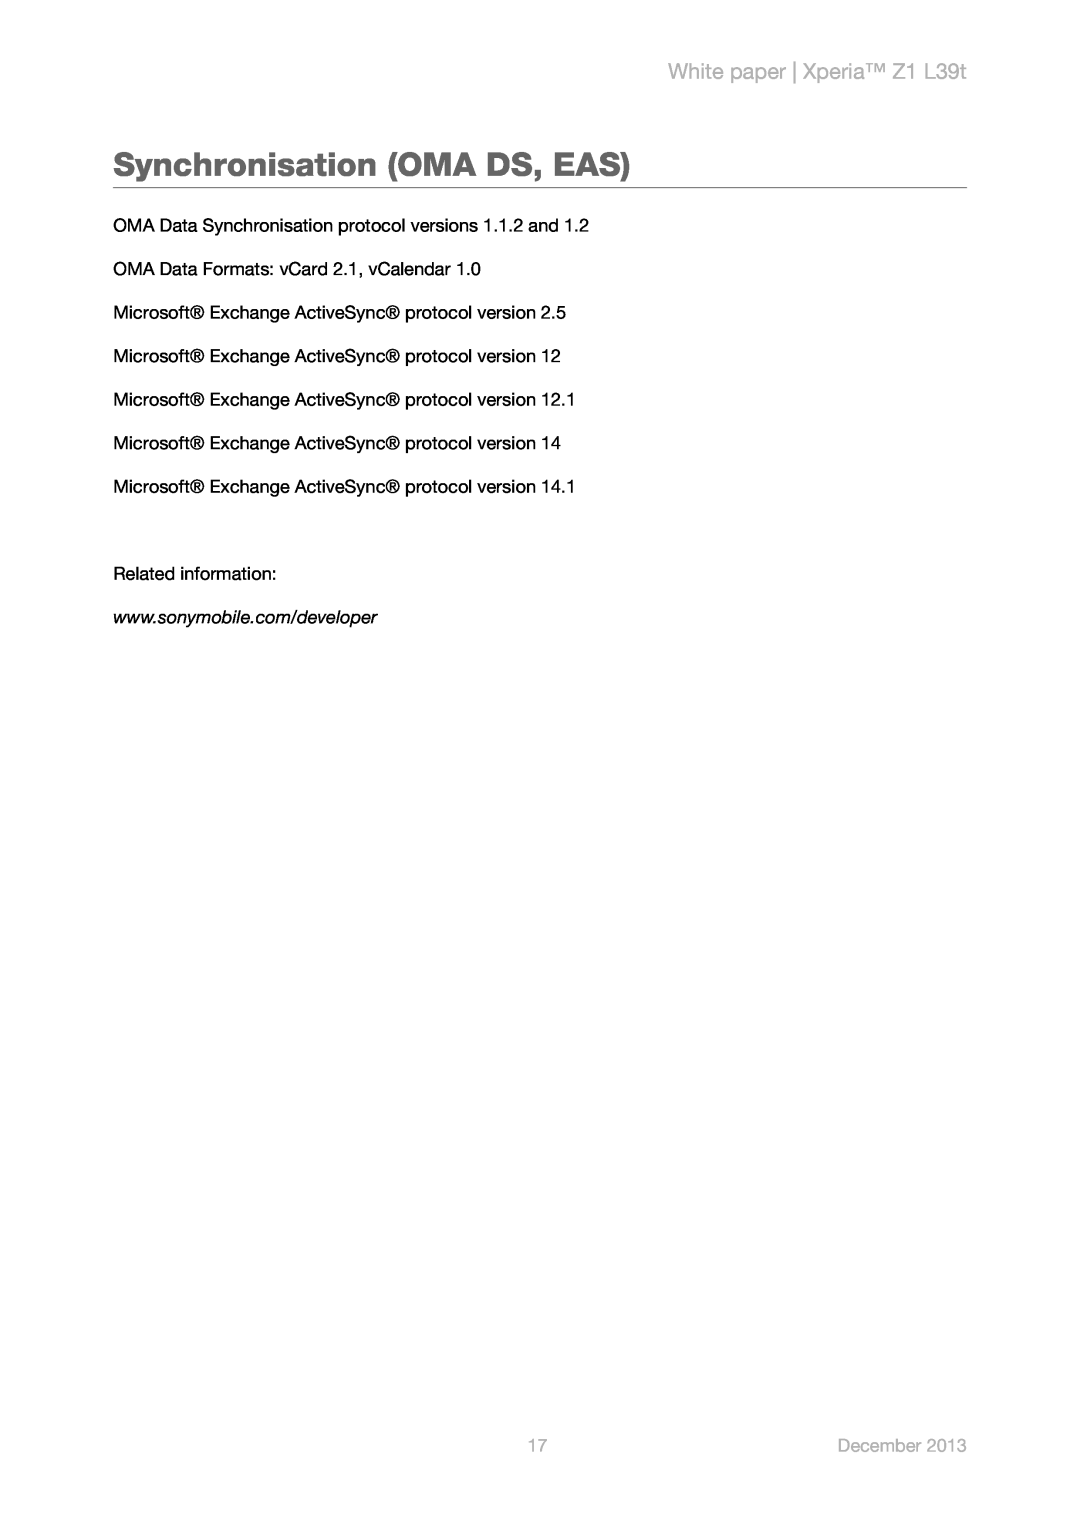 Sony manual Synchronisation OMA DS, EAS, White paper Xperia Z1 L39t, December 